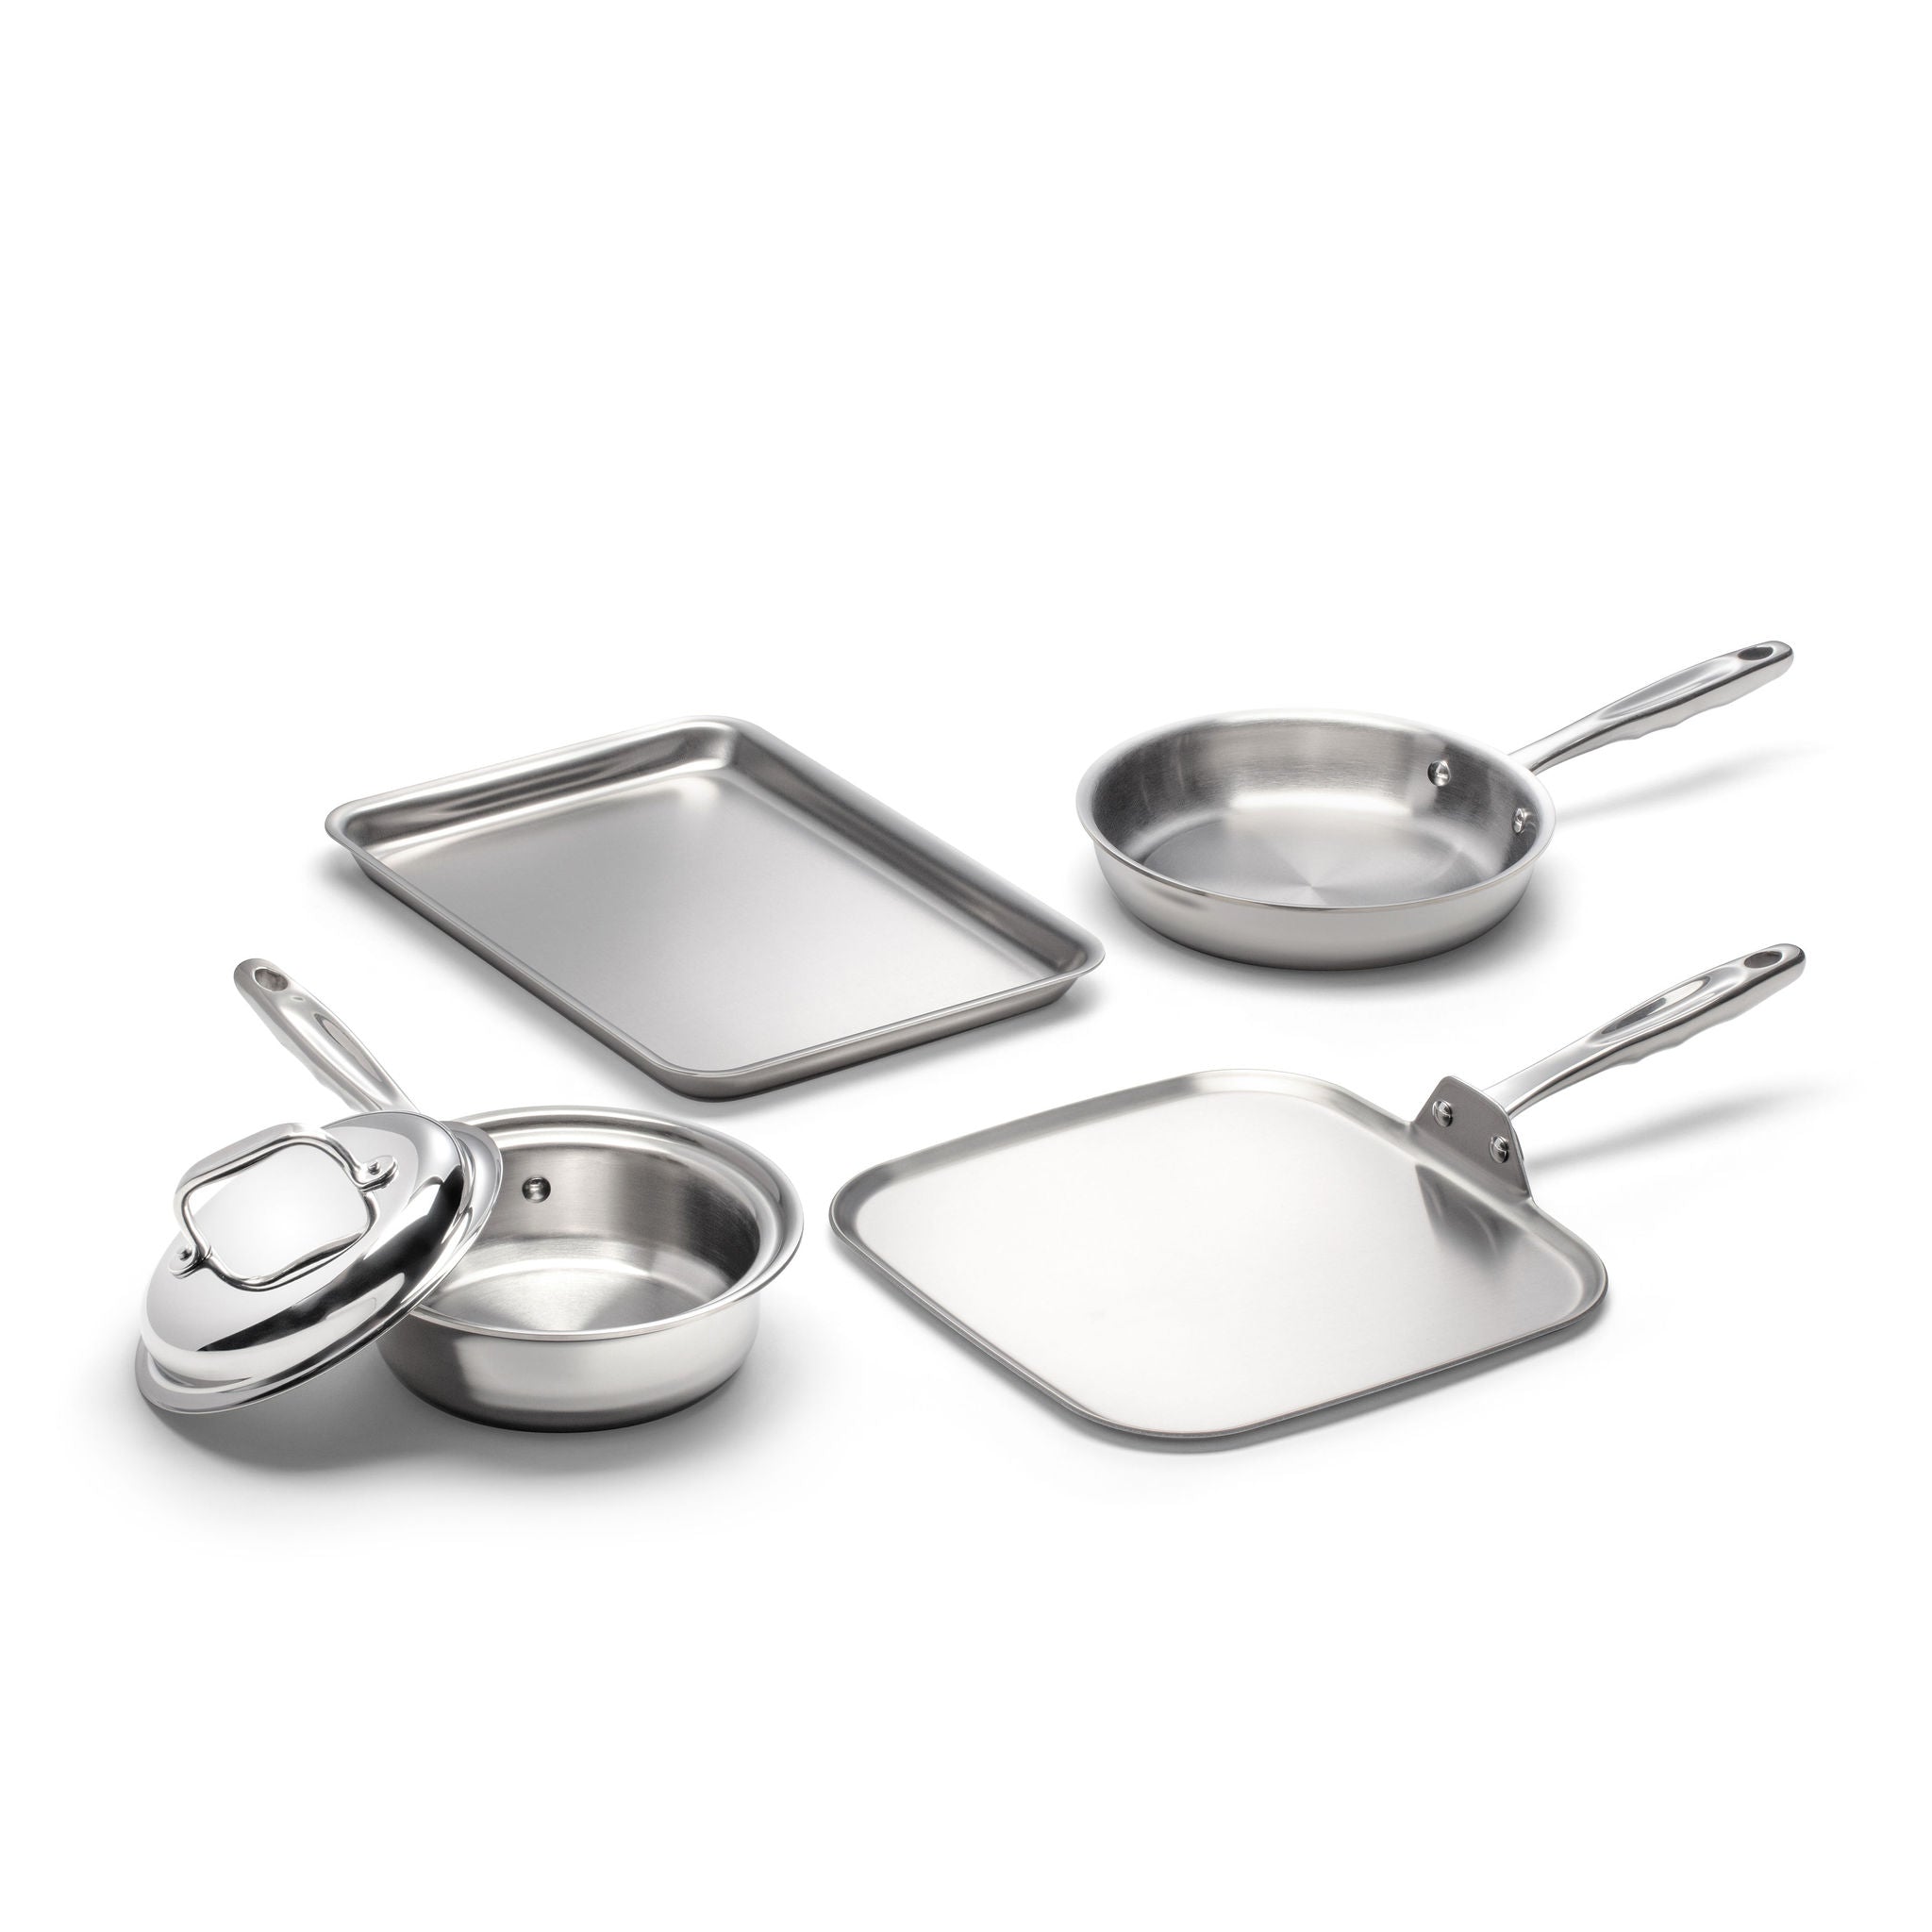 The Best Stainless Steel Cookware Sets